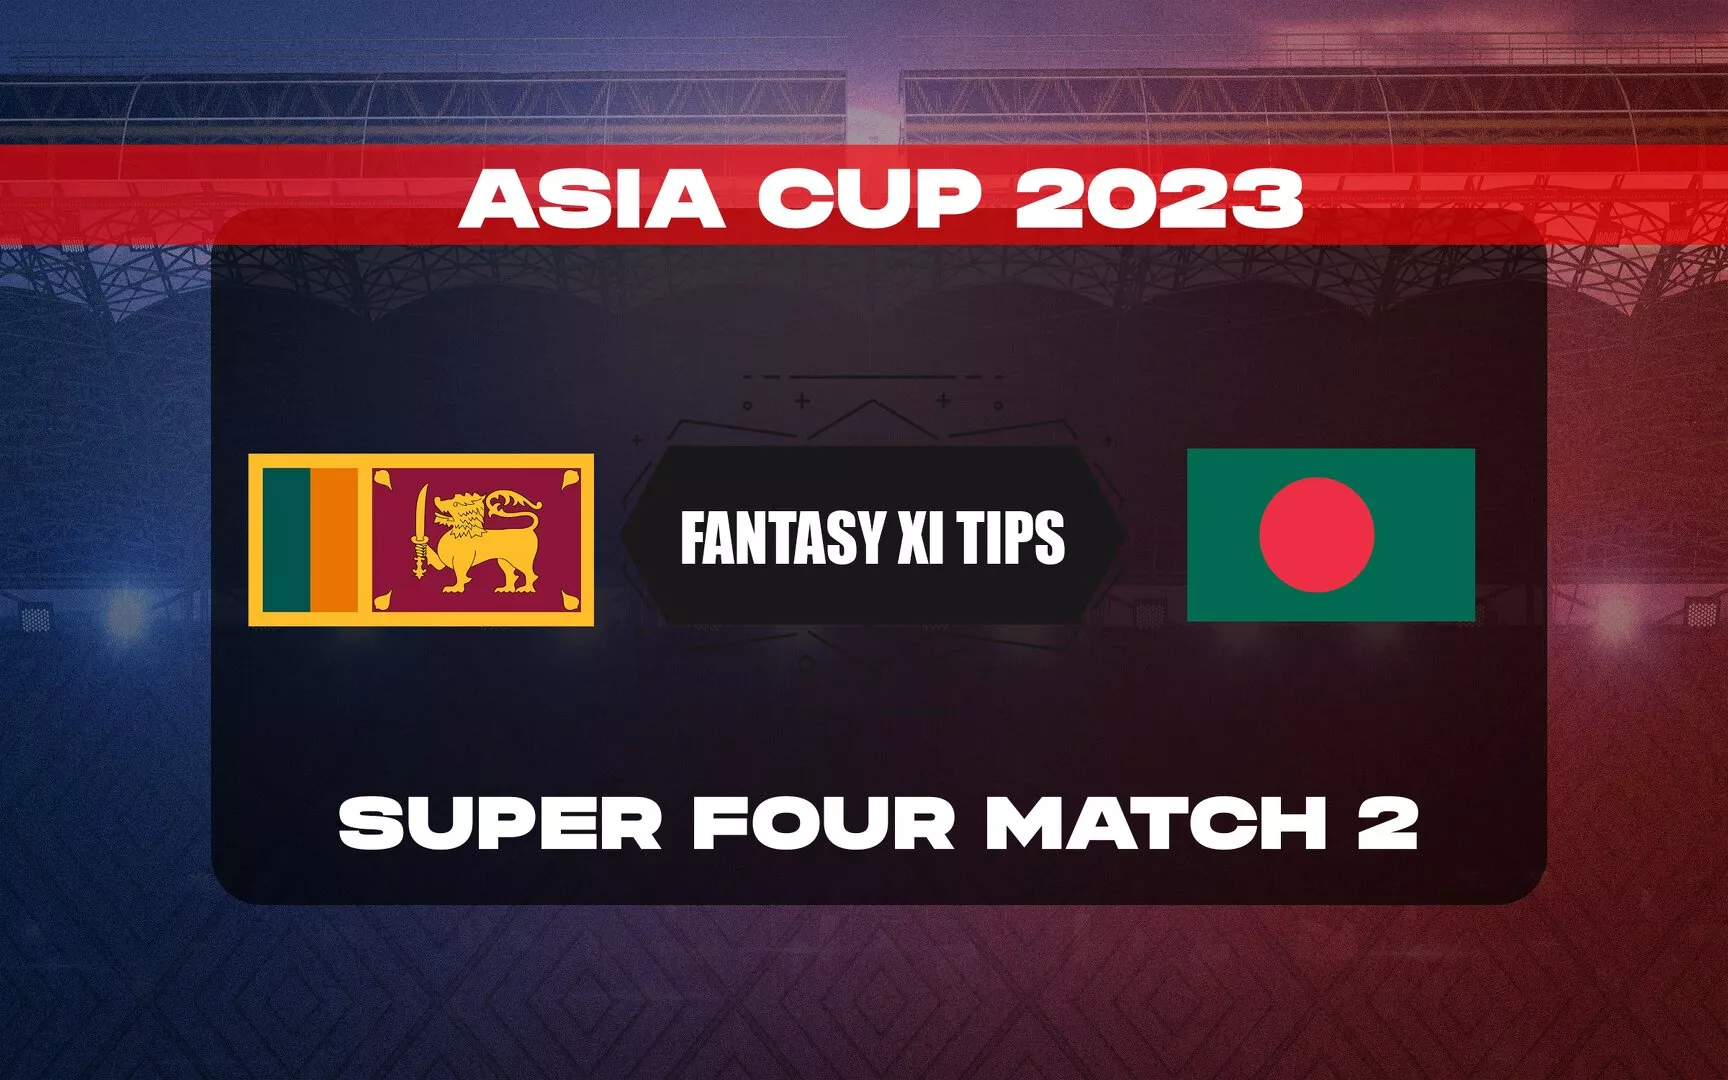 SL vs BAN Dream11 Prediction, Dream11 Playing XI, Today Super Four Match 2, Asia Cup 2023